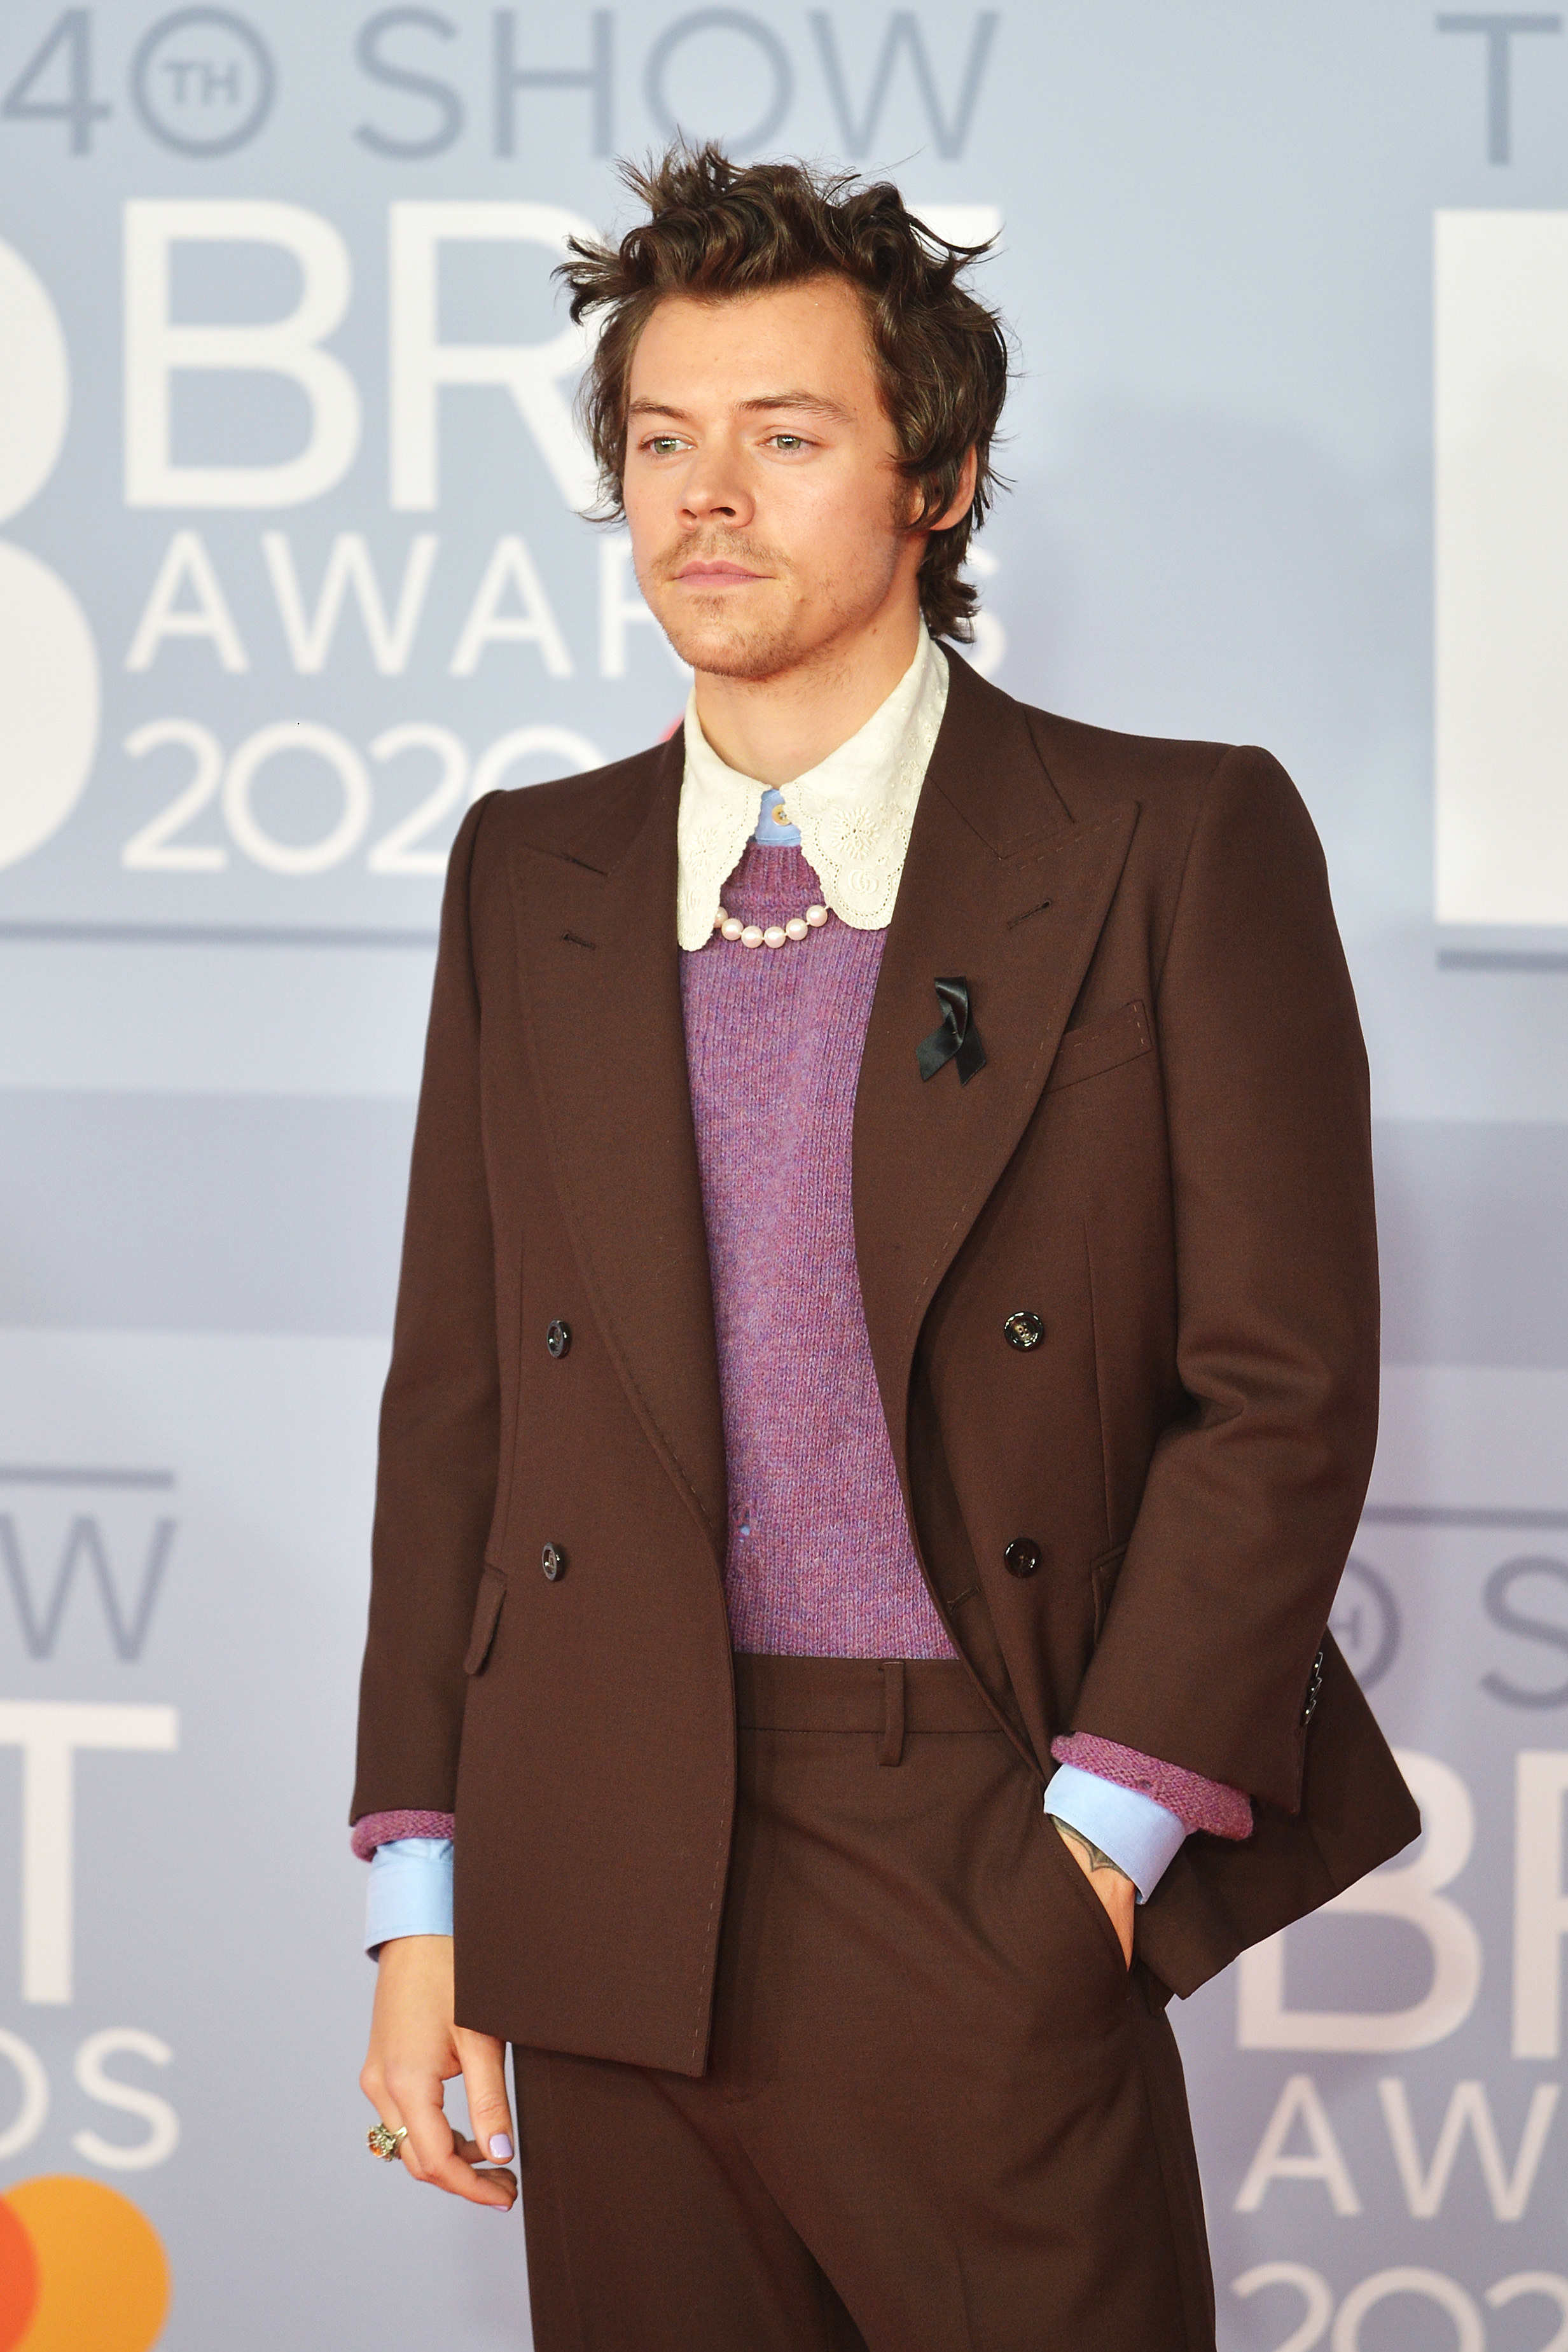 Harry Styles attends The BRIT Awards 2020 at The O2 Arena on February 18, 2020 in London, England